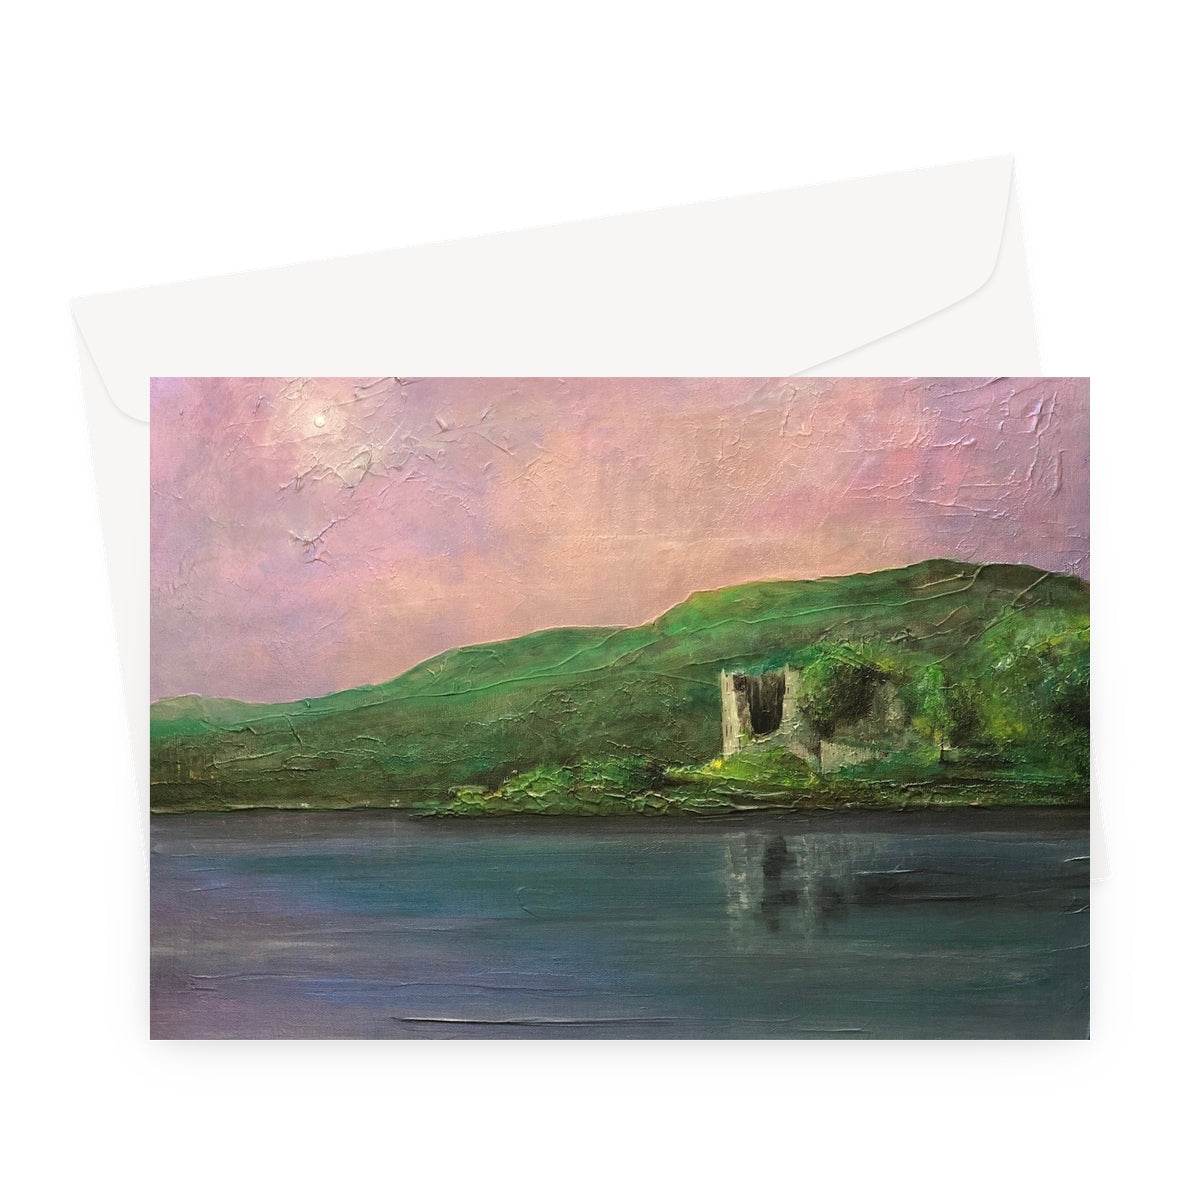 Old Castle Lachlan Art Gifts Greeting Card-Stationery-Prodigi-A5 Landscape-10 Cards-Paintings, Prints, Homeware, Art Gifts From Scotland By Scottish Artist Kevin Hunter